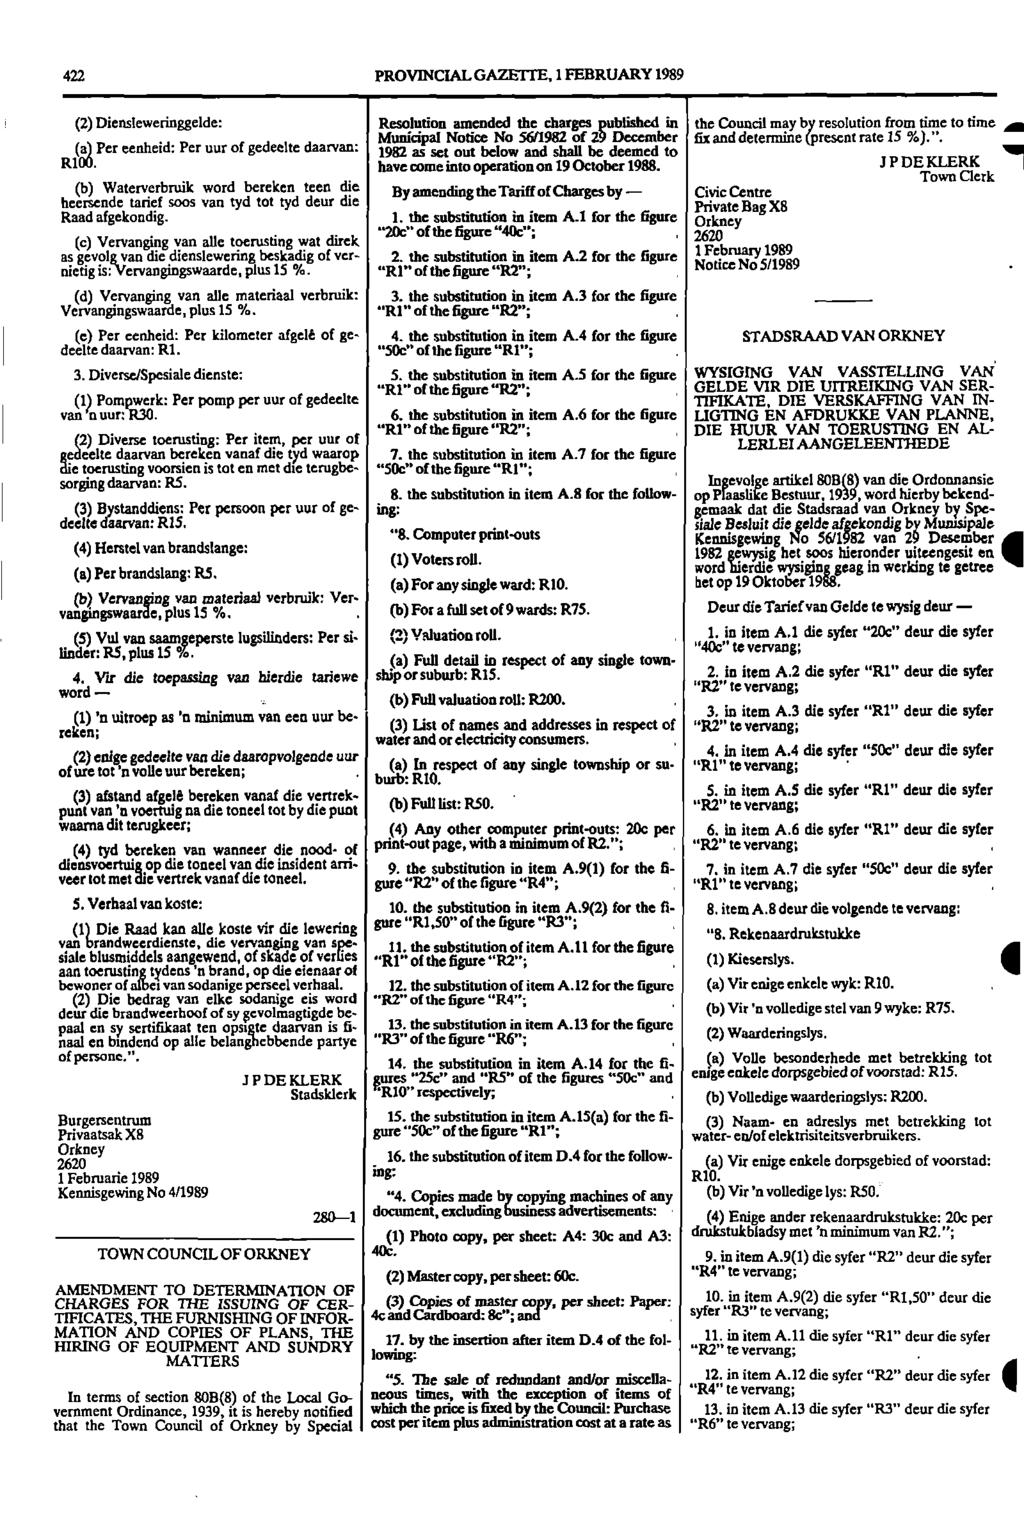 422 PROVINCIAL GAZETTE, 1 FEBRUARY 1989 (2) Diensleweringgelde: Resolution amended the charges published in the Council may by resolution from time to time Municipal Notice No 56/1982 of 29 December